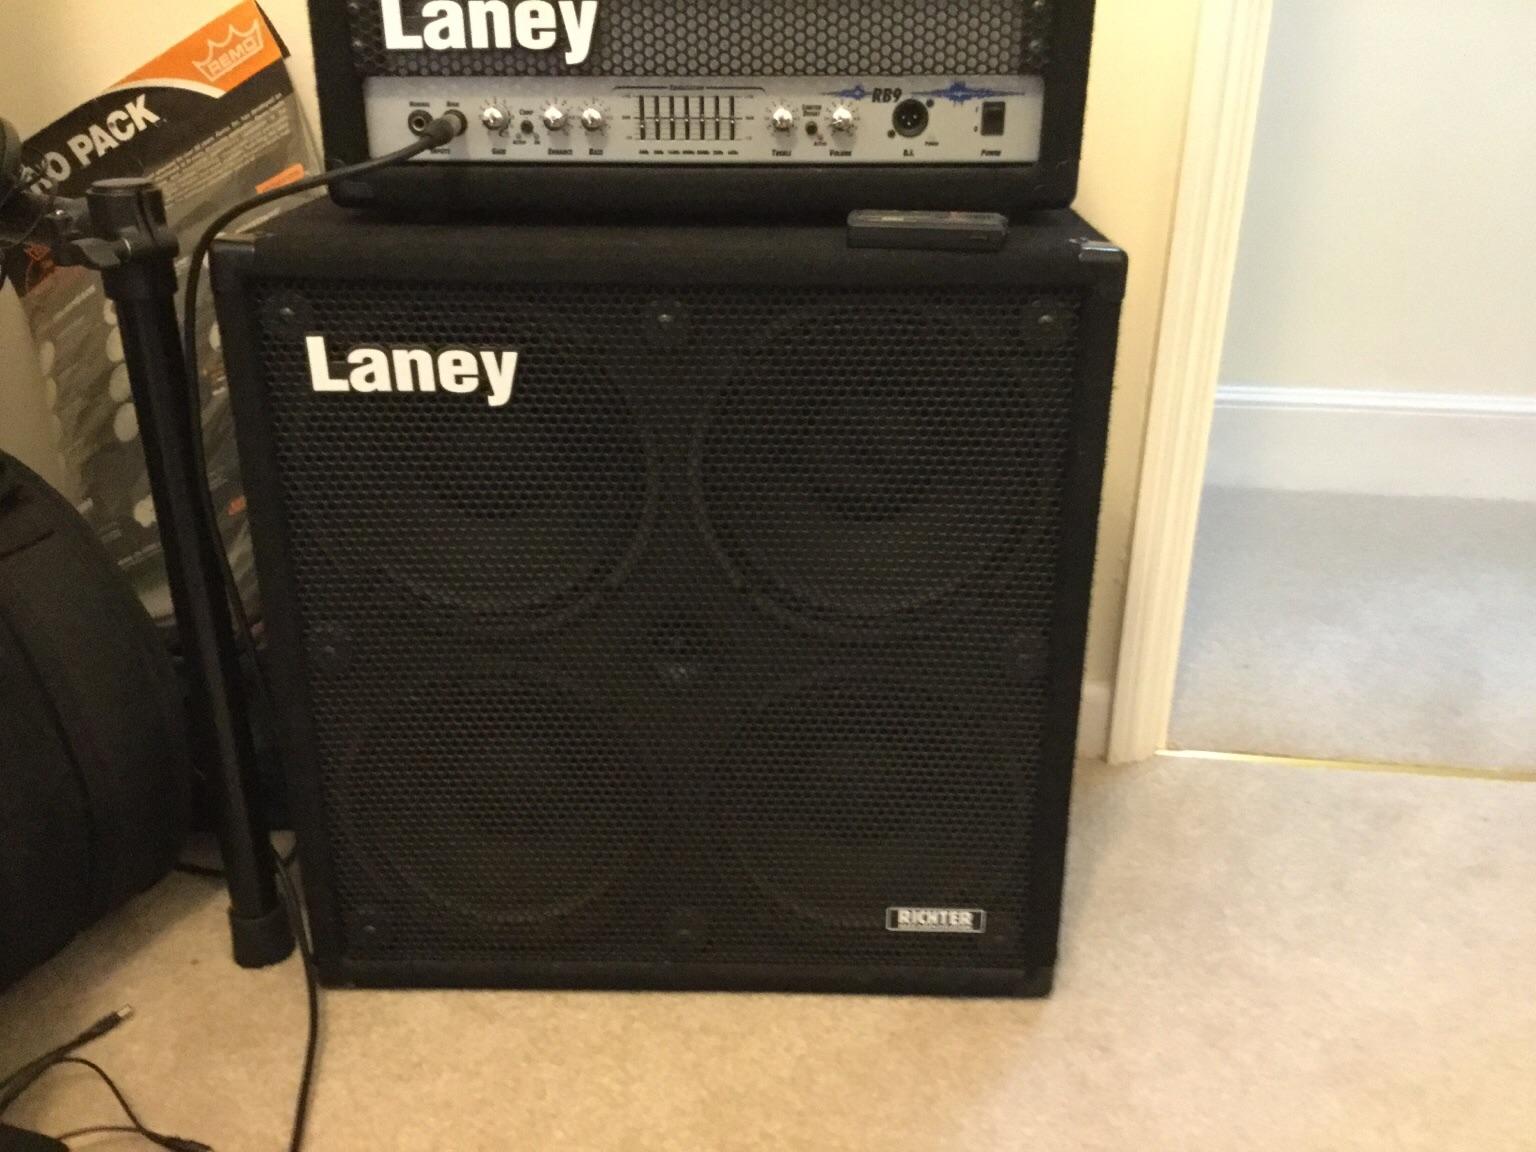 Laney Bass Stack Amp Head Plus 4x10 Cabinet In Nr4 Norwich Fur